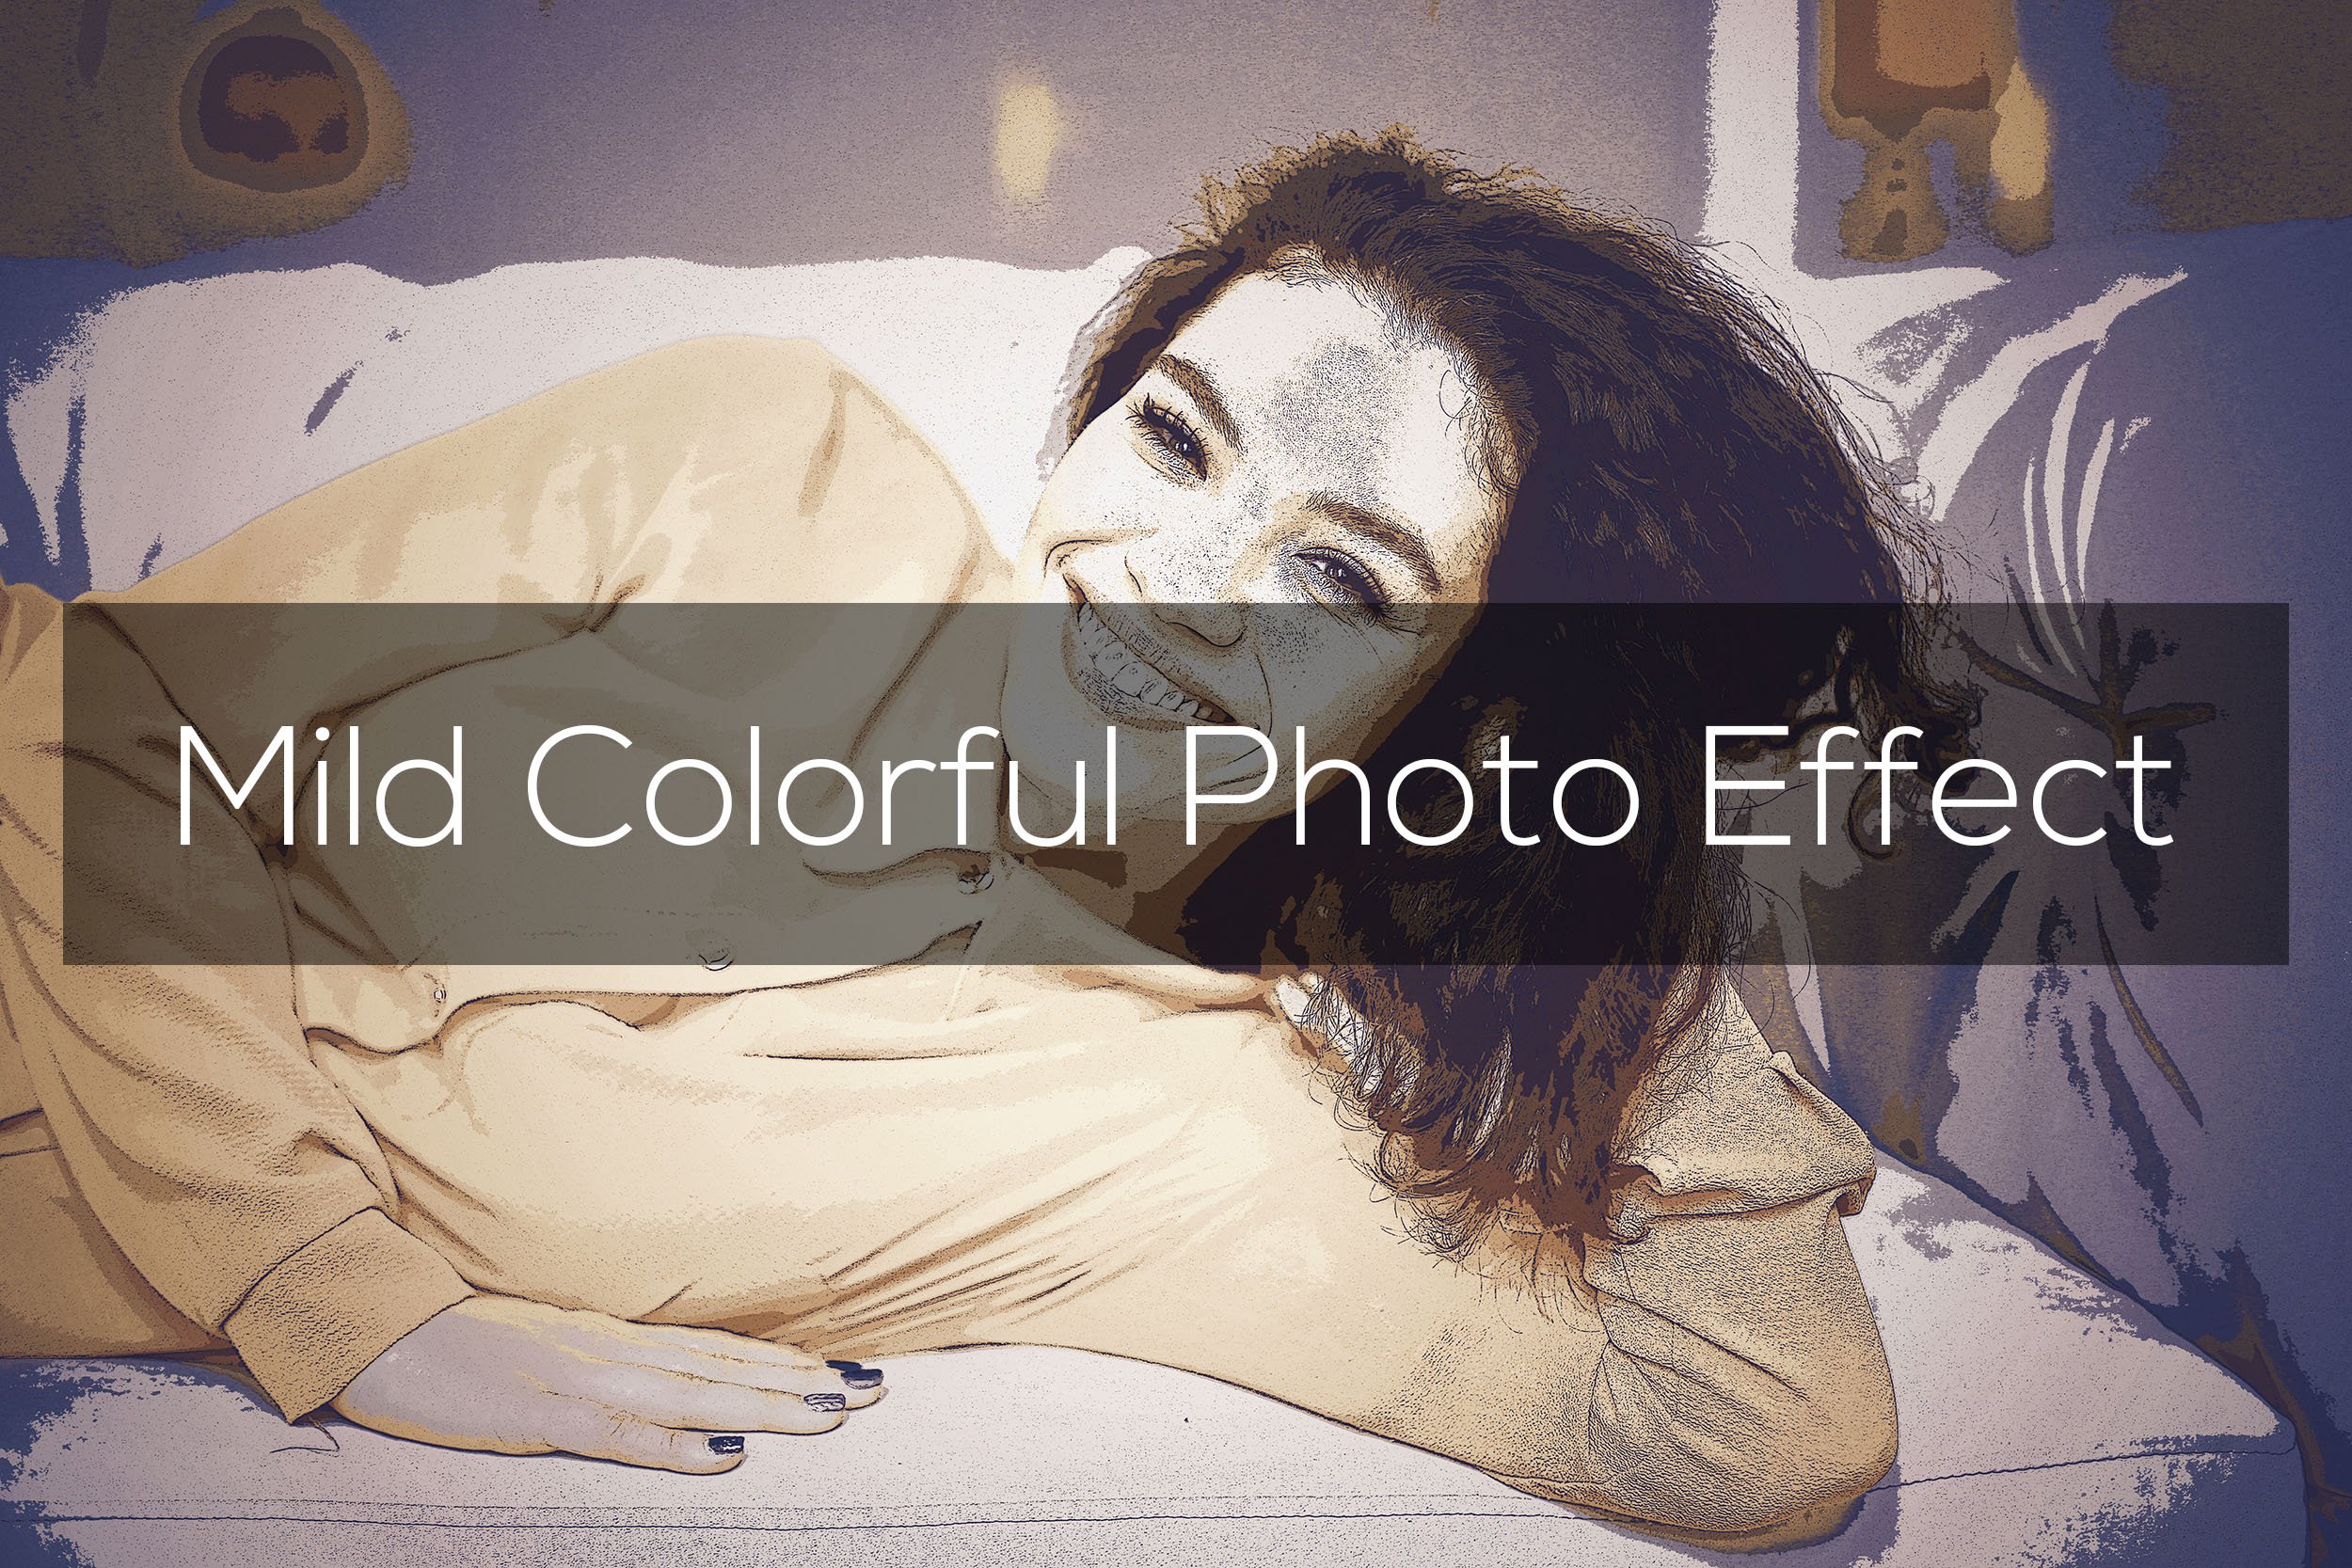 Mild Colorful Photo Effectcover image.